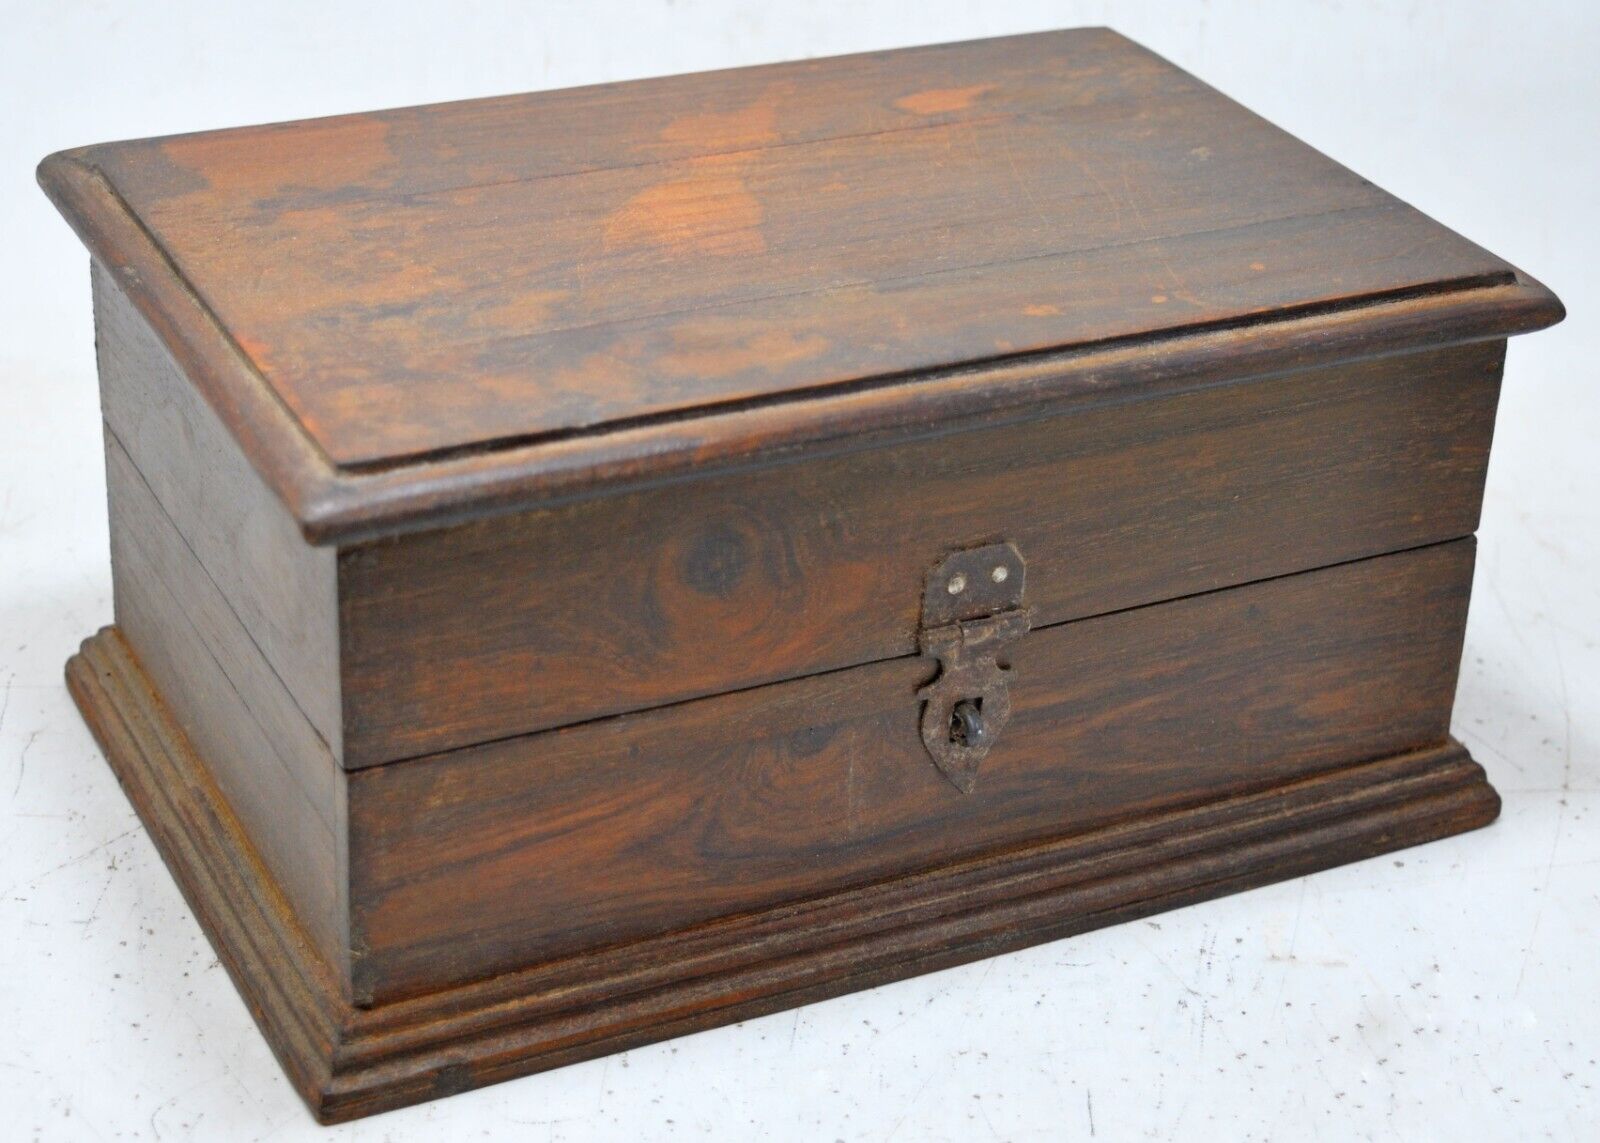 Vintage Wooden Jewellery Box Original Old Hand Crafted